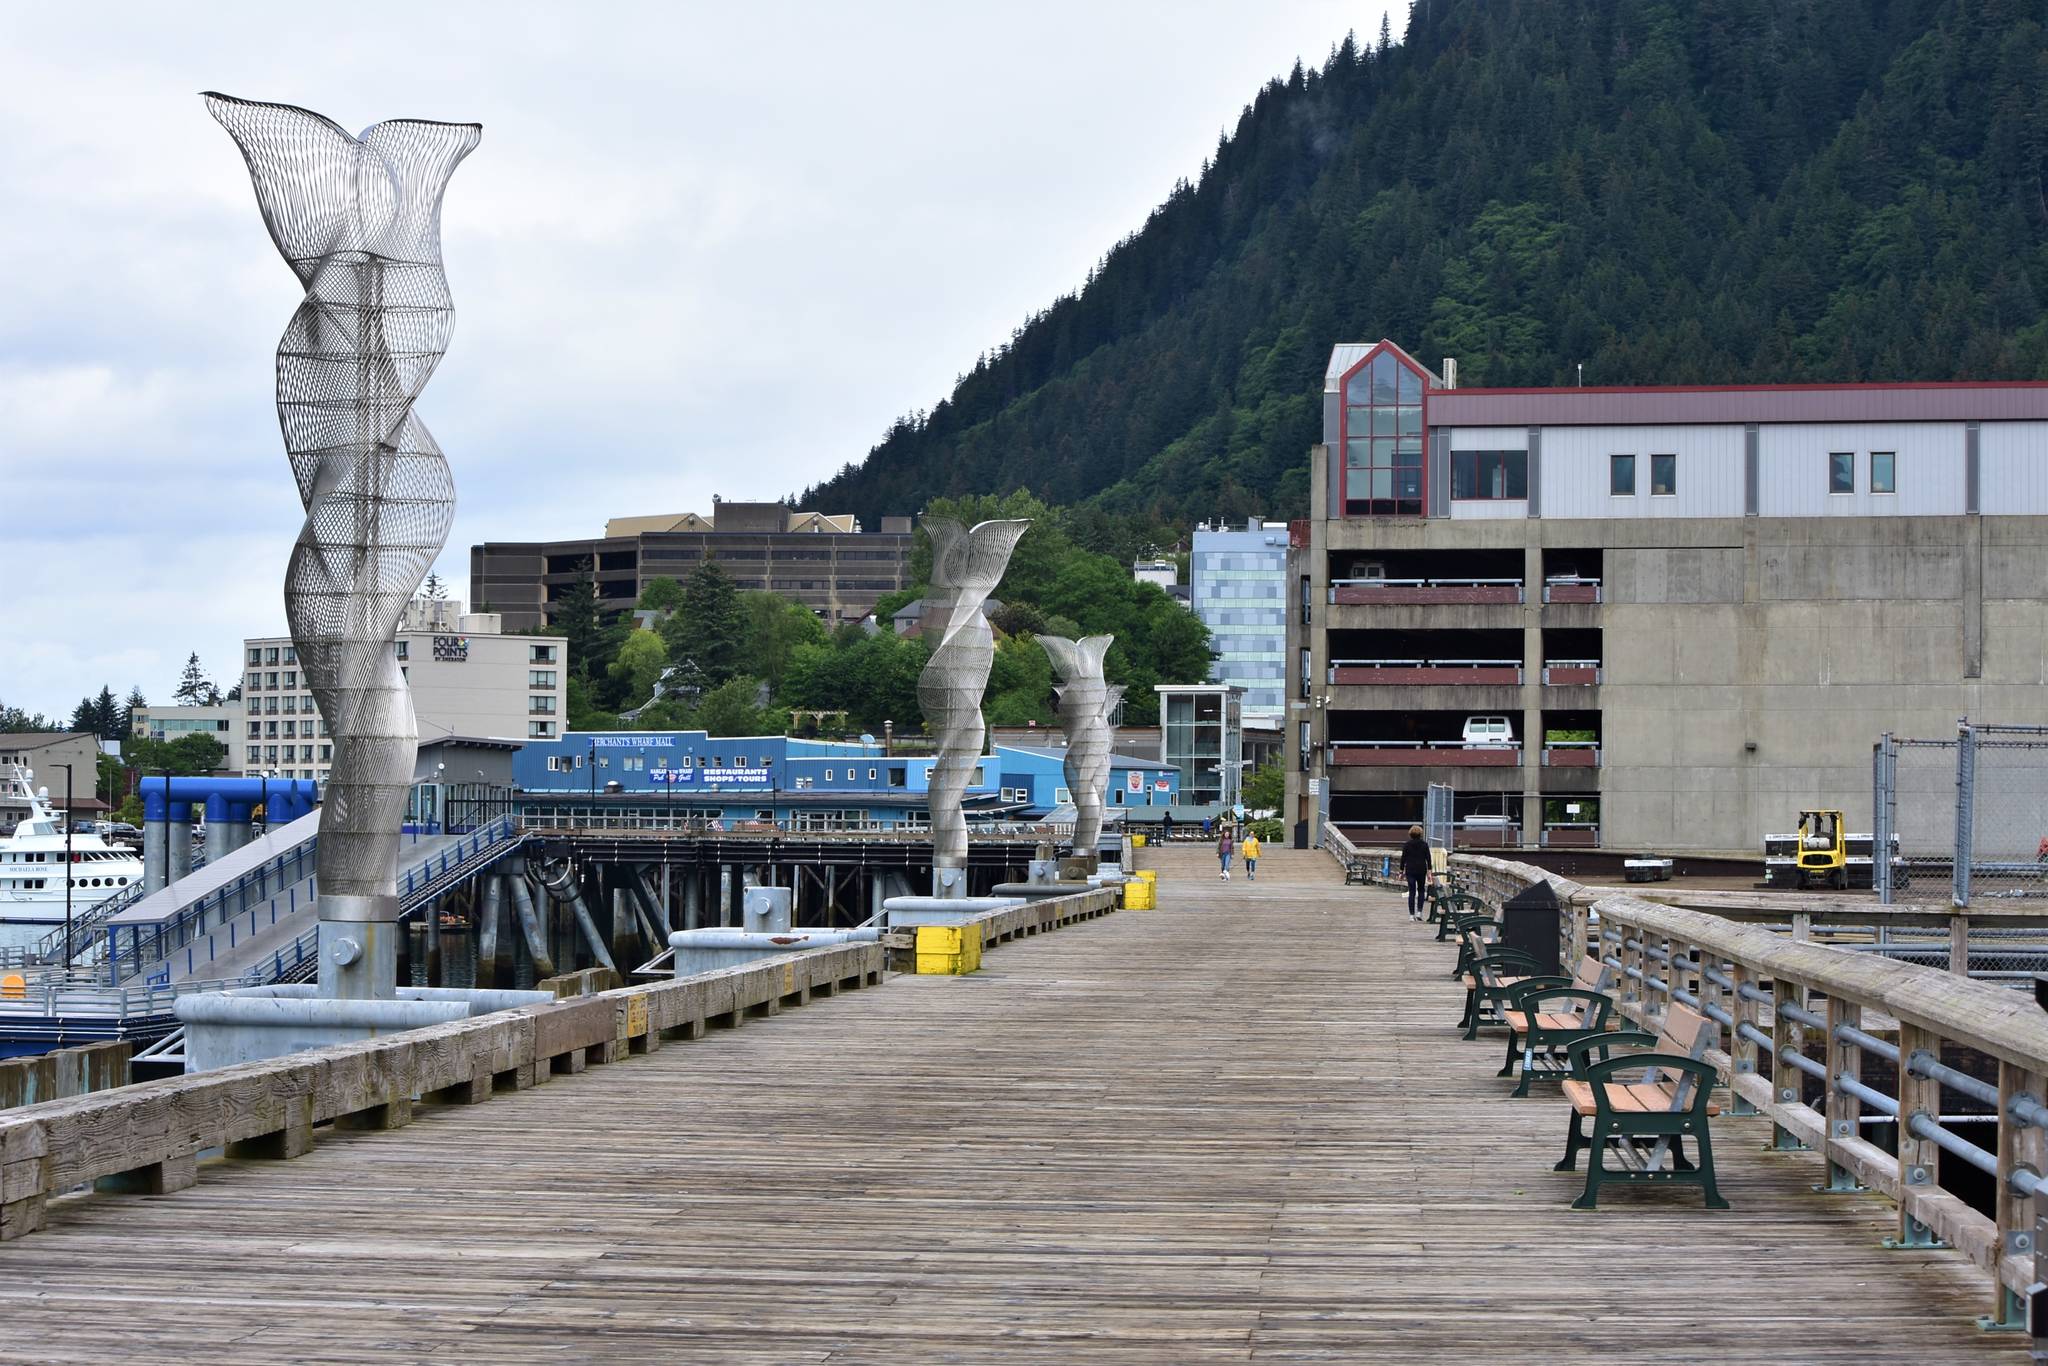 An empty downtown port on Sunday, June 12, 2020. The coronavirus pandemic effectively shut down the tourist industry for the 2020 season. Southeast Alaska has been hit particularly hard by job loss, but jobs are down throughout the state, according to state data. (Peter Segall / Juneau Empire File)